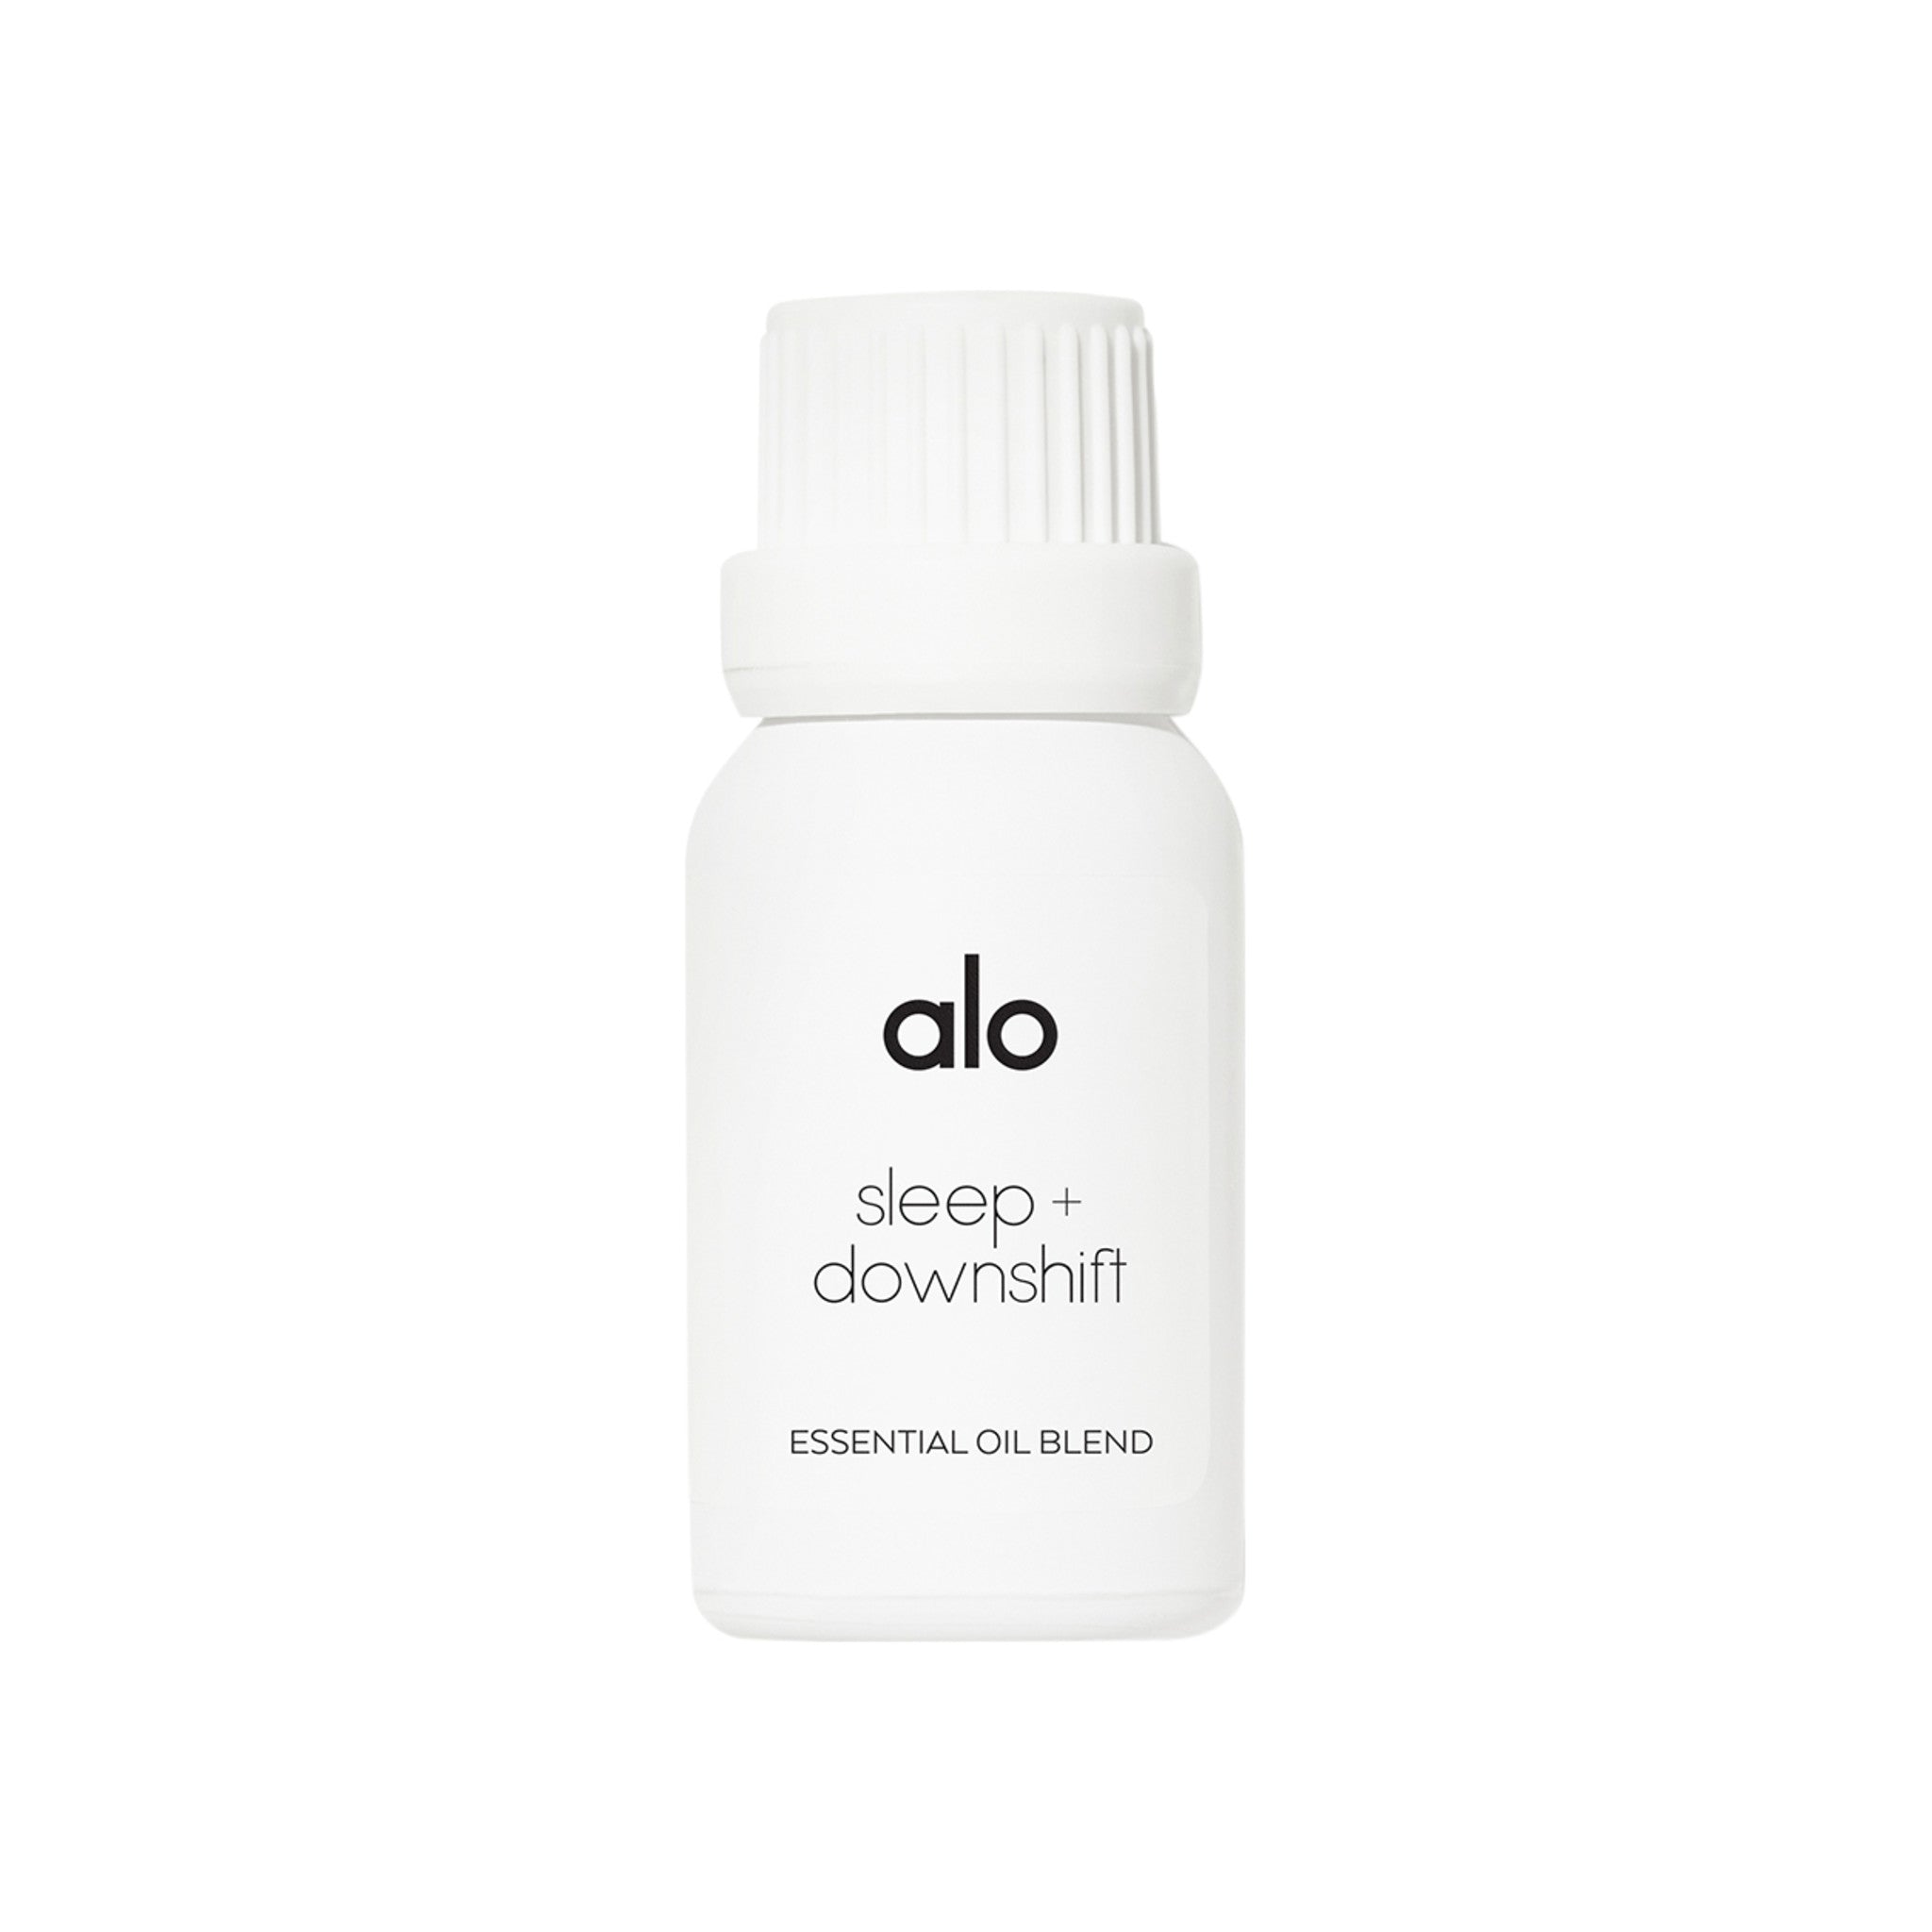 Alo Essential Oil Sleep and Downshift main image.